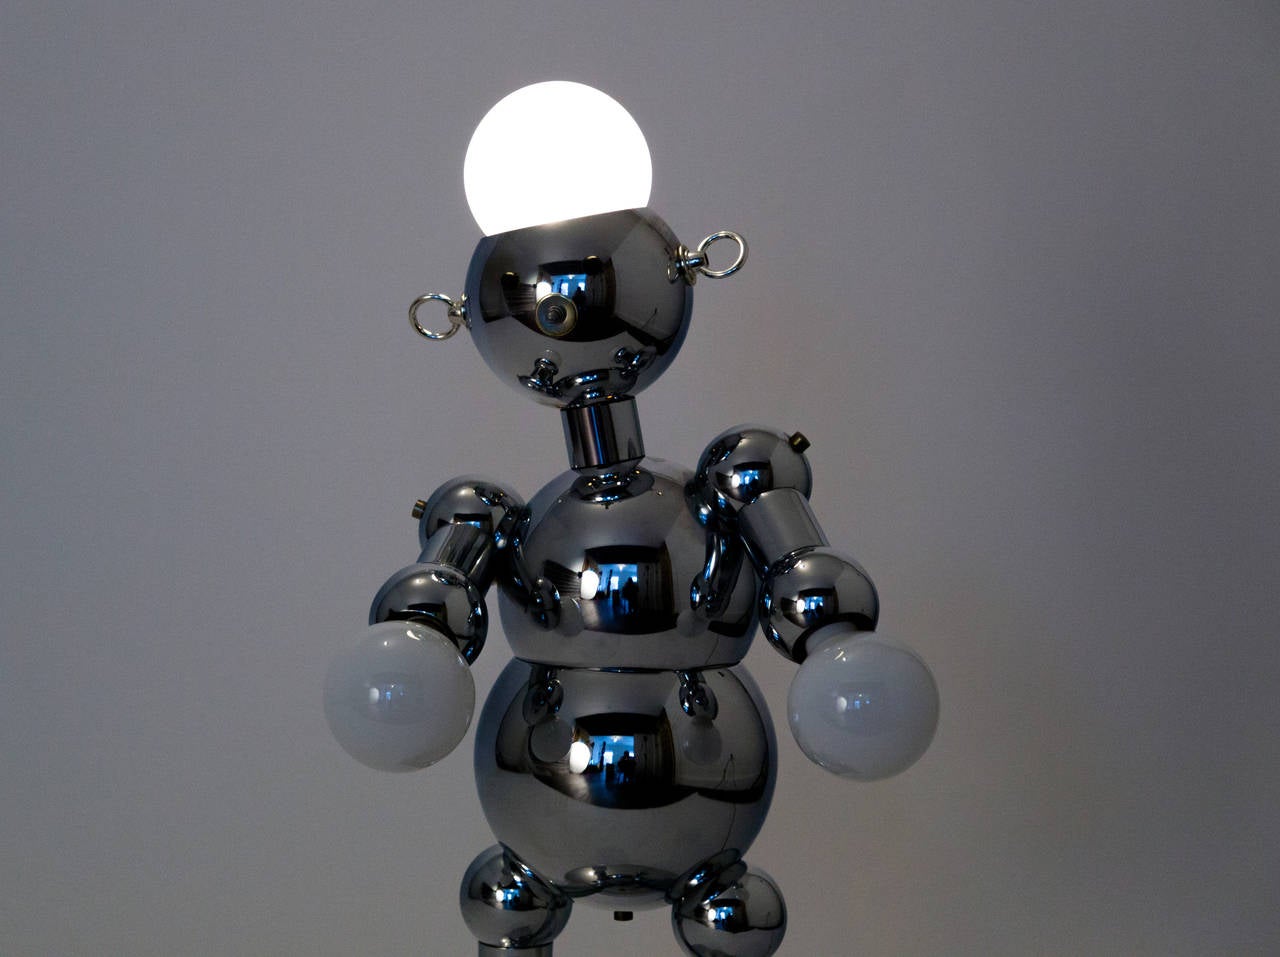 A charming, figural robot table lamp produced by Torino, comprising a segmented body in chrome, black resin eyes, metal ring fittings for ears, and a nose-switch that allows you to illuminate the head and the hands separately or together. We love